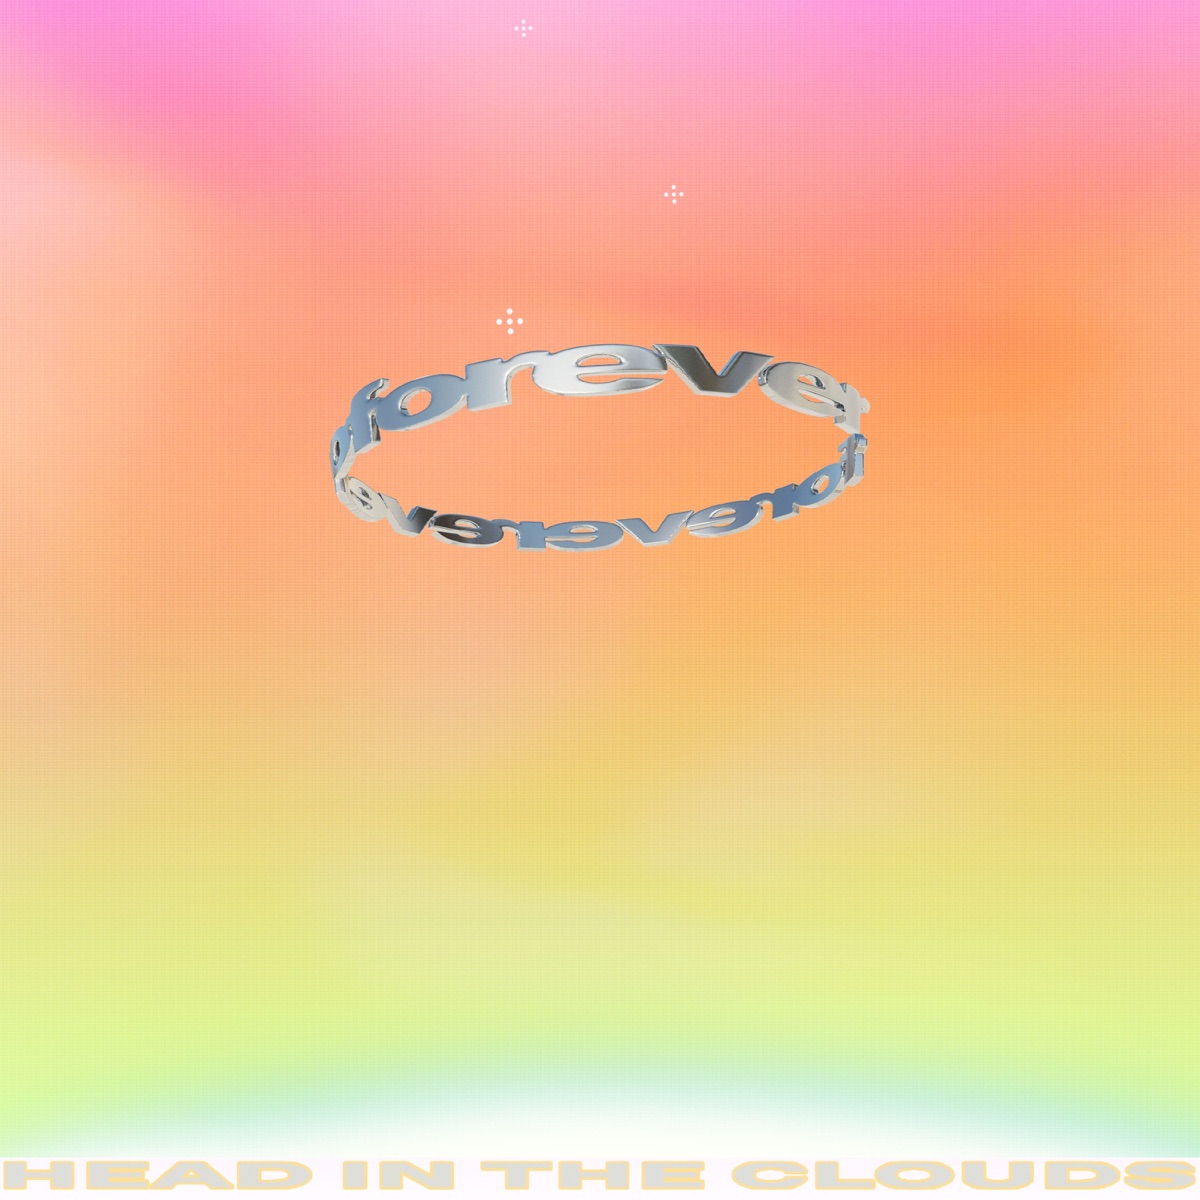 Cover art for『88rising, HIKARU UTADA, Warren Hue - T』from the release『Head In The Clouds Forever』